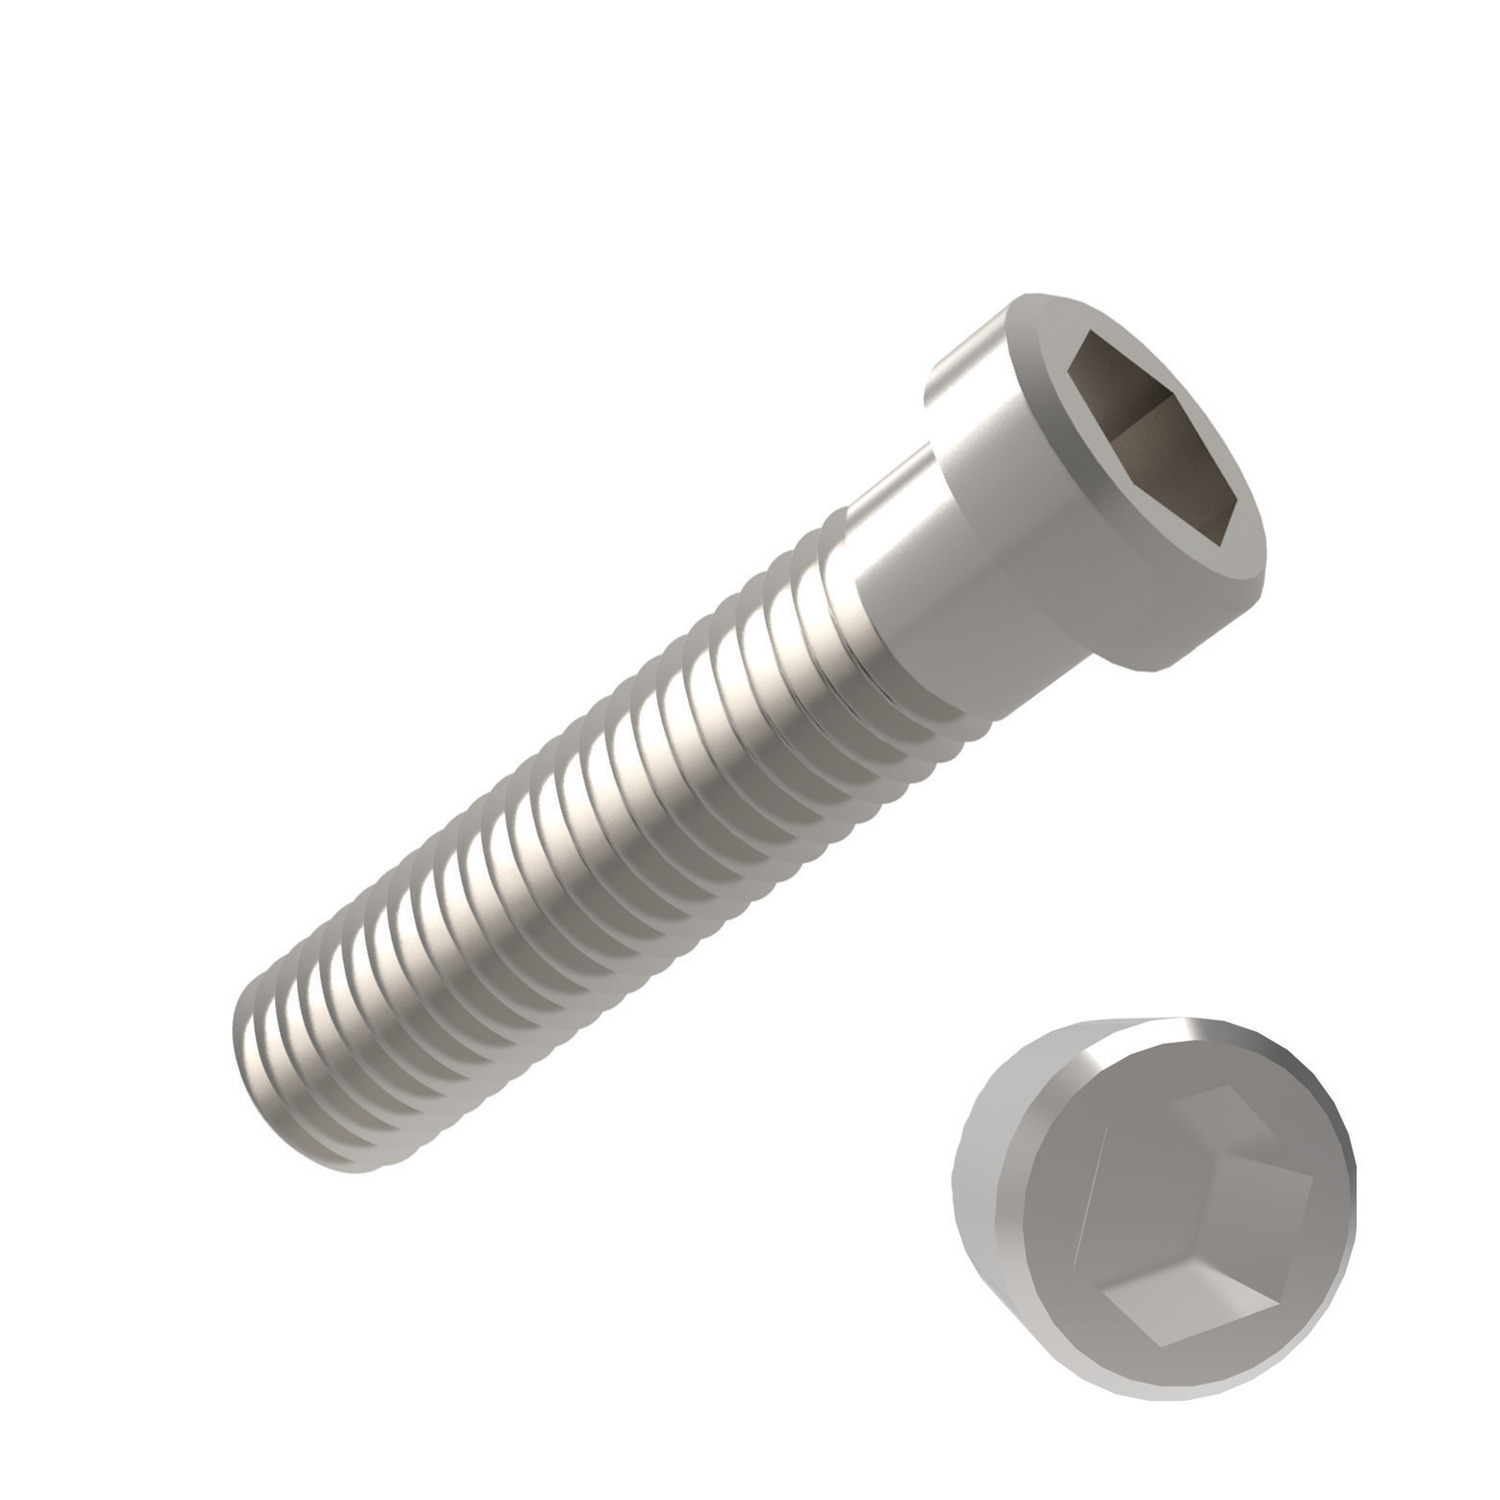 Low Head Cap Screws Stainless Steel A2. To DIN 7984. For the majority of screw lengths the threads goes all the way to the head of the screw (i.e. l1= l2).For longer length screws the threaded portion l21.  Also available in Stainless Steel A4 (P0205.A4) and Zinc Plated (P0205.ZP).